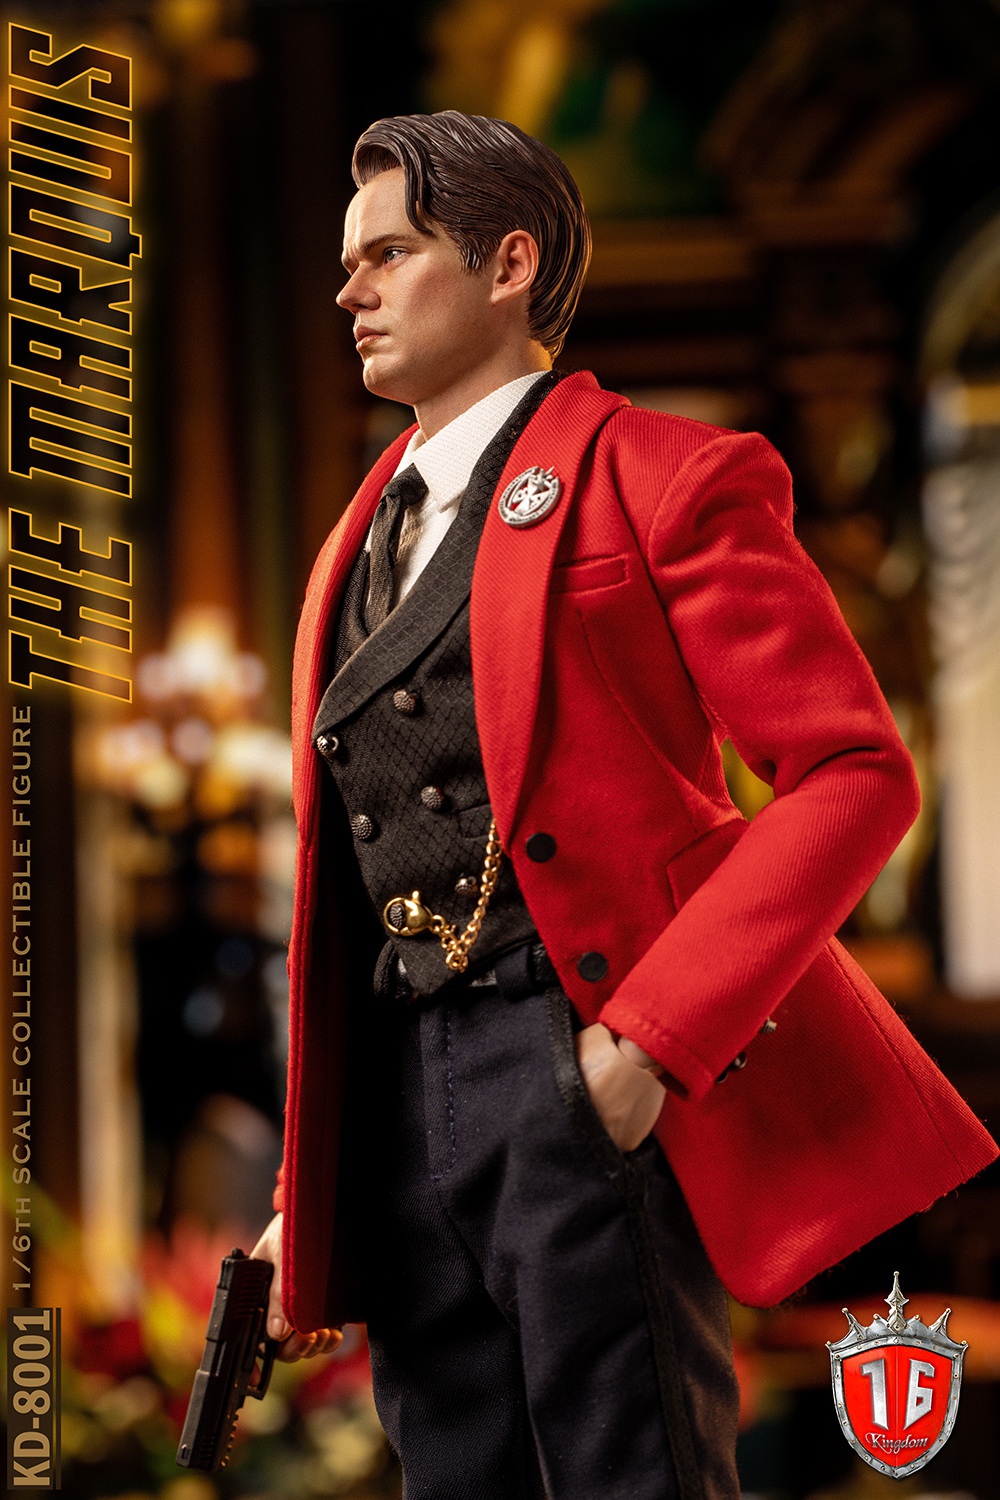 movie-based - NEW PRODUCT: Kingdom: 1/6 The Marquis Action Figure KD-8001 11405910